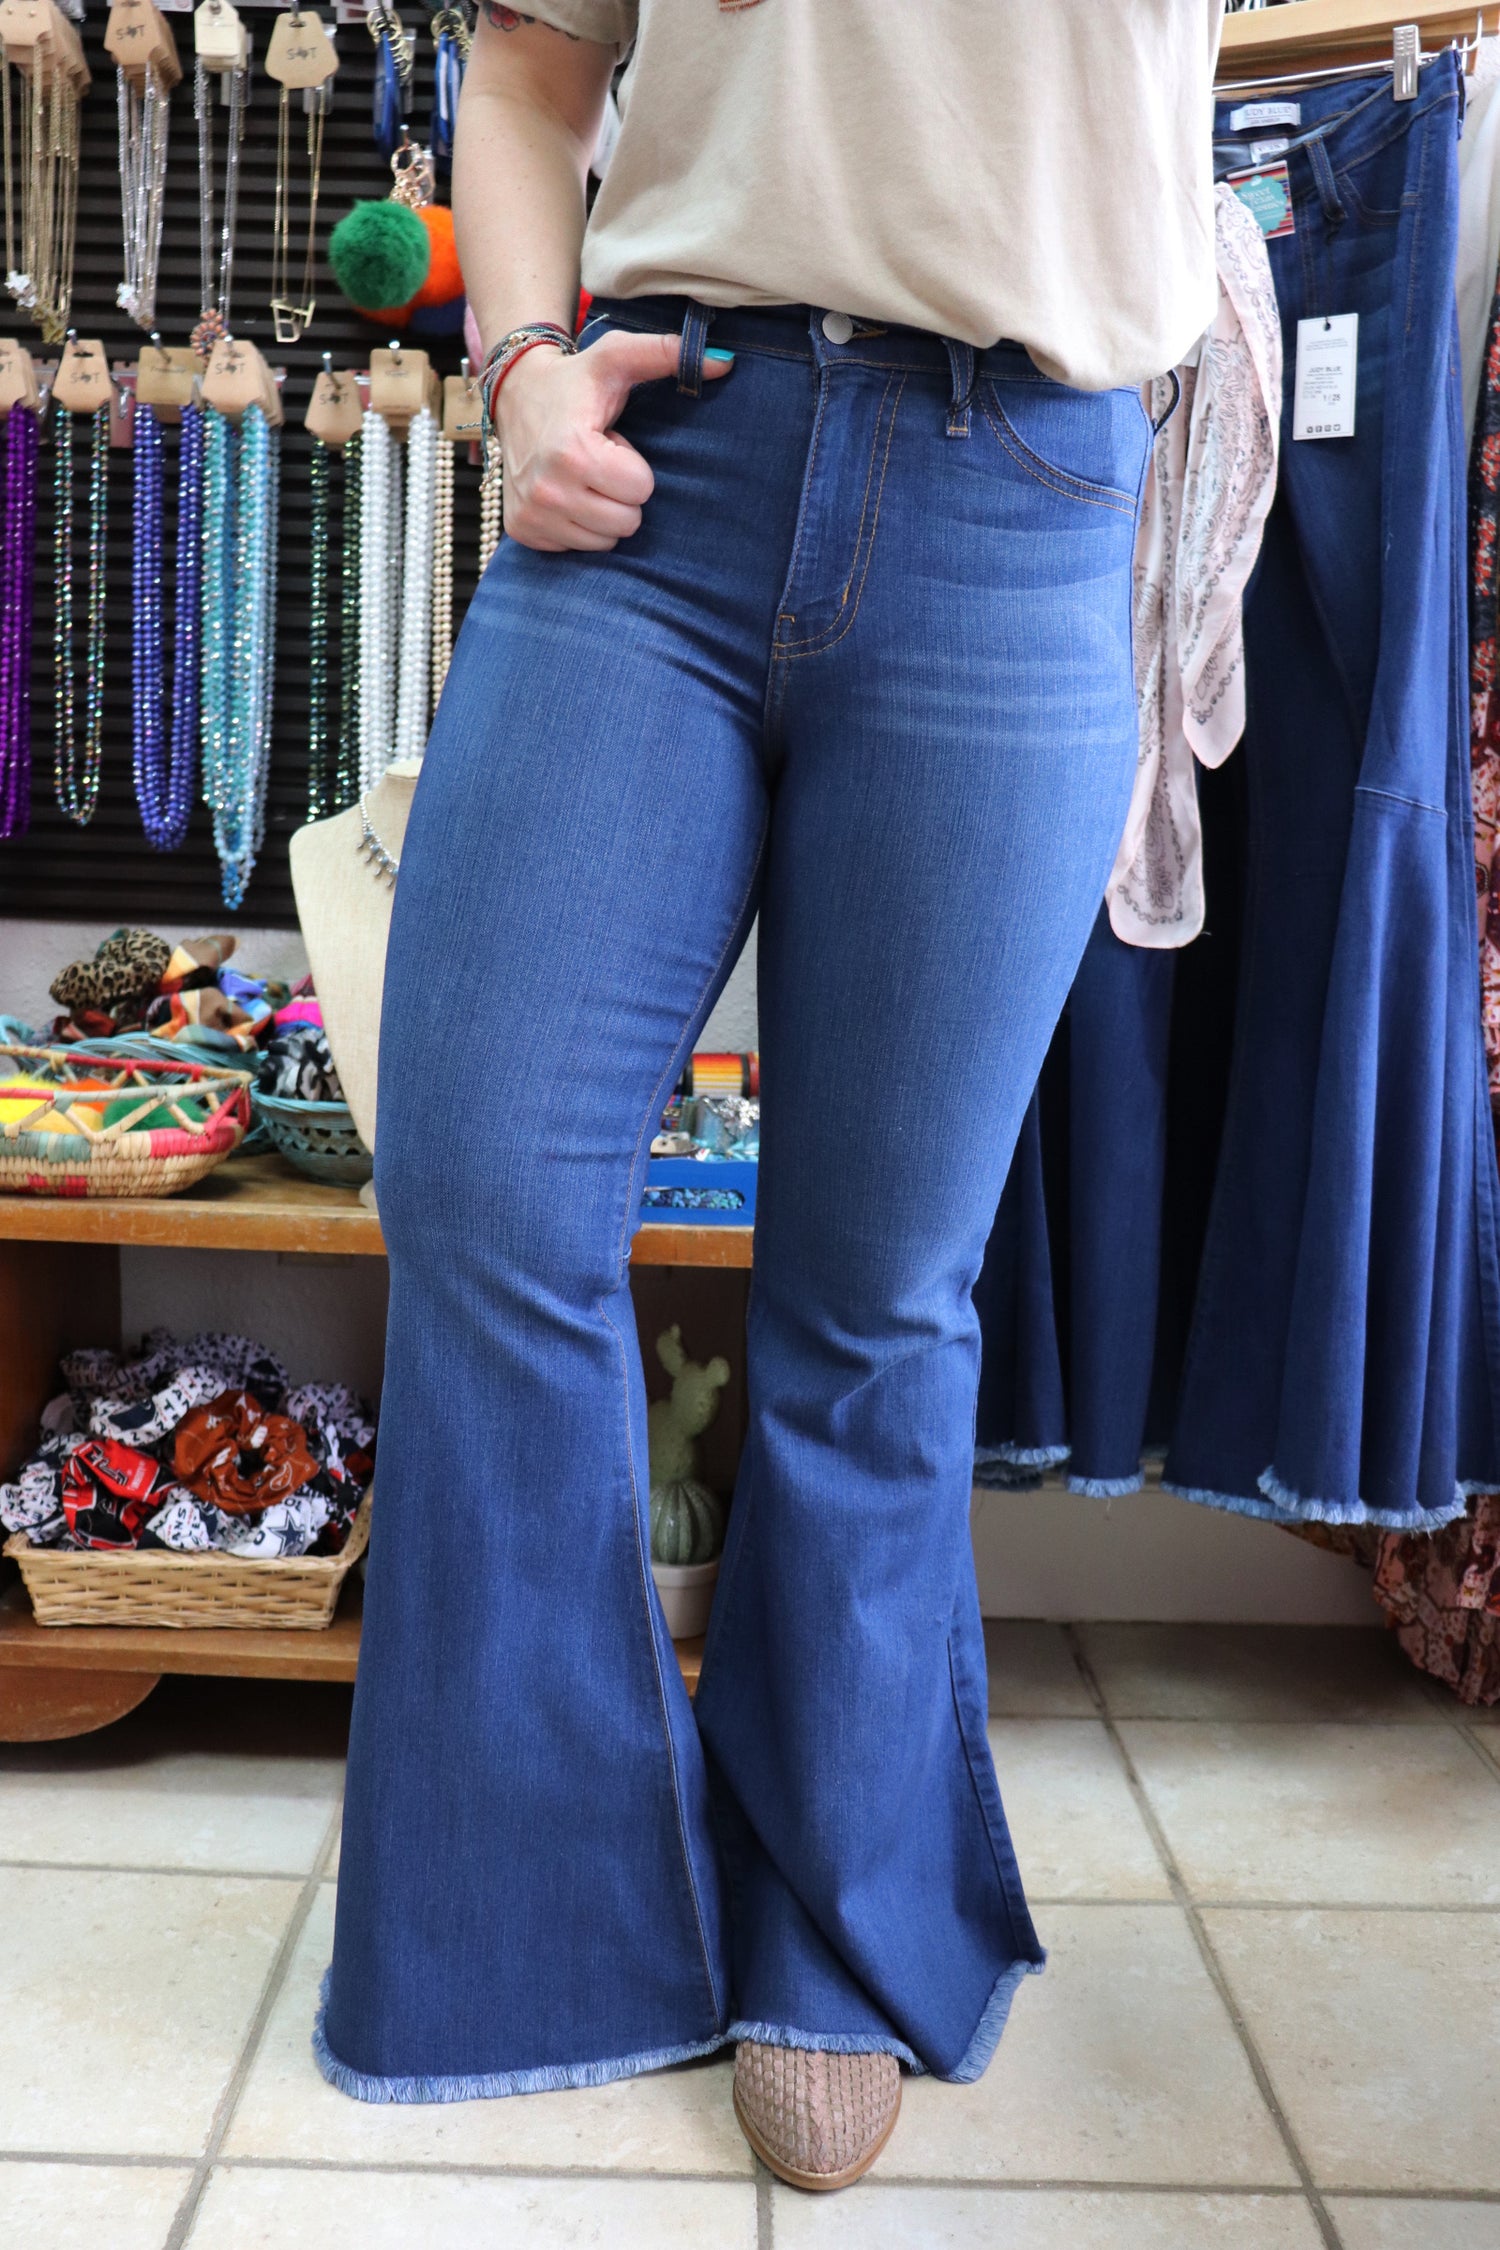 Featuring a 33 inch inseam and a raw edge, these flare jeans are a comfy fave! Style Suggestion: Pair these bells with a fun embroidered top and one of our felt hats for the perfect year round western look! Great paired with wedges or boots! Size Suggestion: 0 (24), 1 (25), 3 (26), 5 (27), 7 (28), 9 (29), 11 (30), 13 (31), 15 (32)